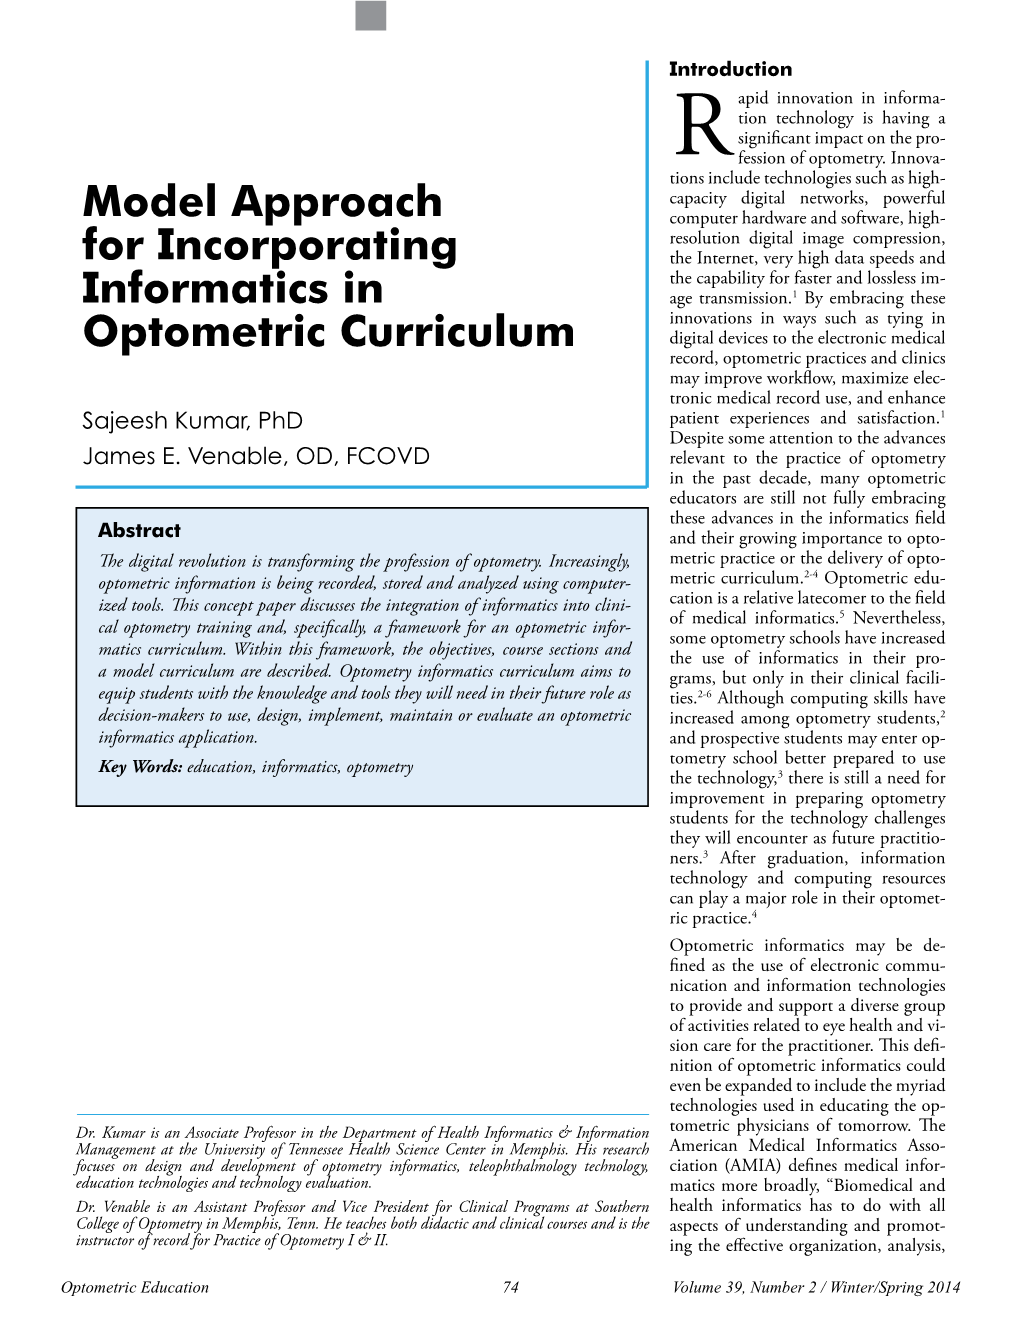 Model Approach for Incorporating Informatics in Optometric Curriculum